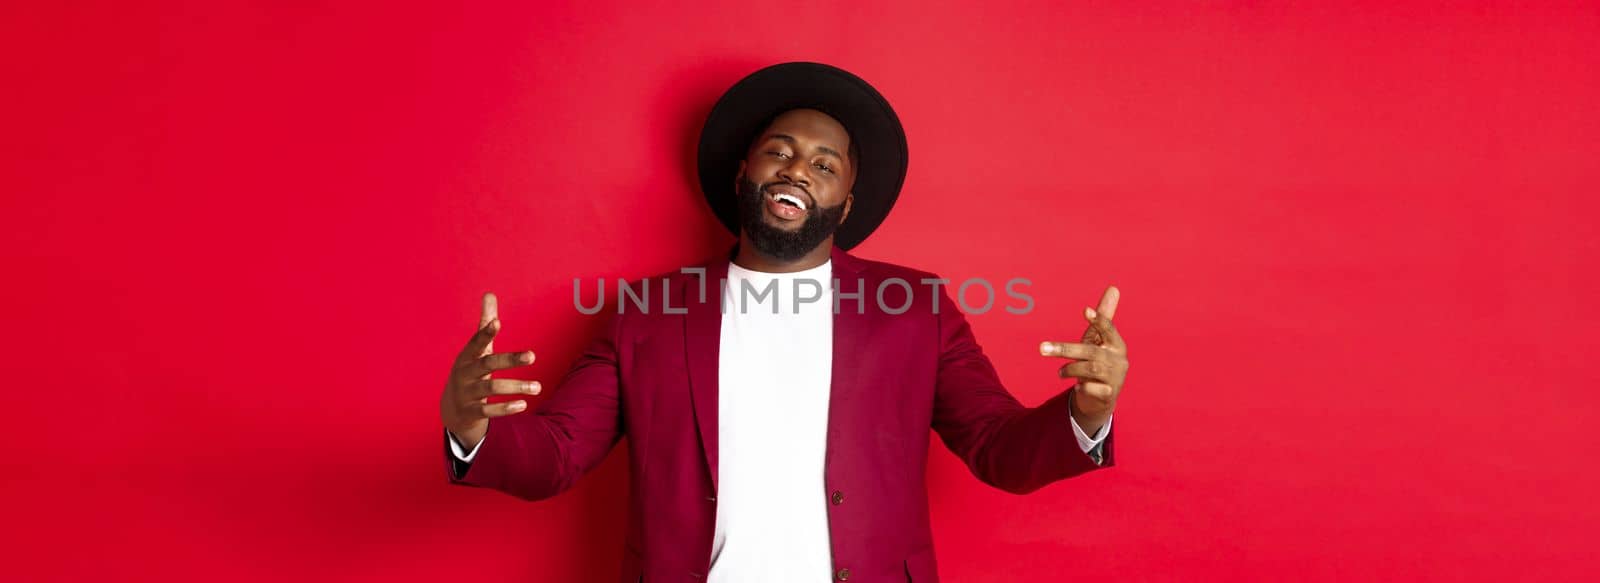 Christmas shopping and people concept. Confident and sassy man showing bring it on gesture, dancing hip hop and looking self-assured at camera, red background.